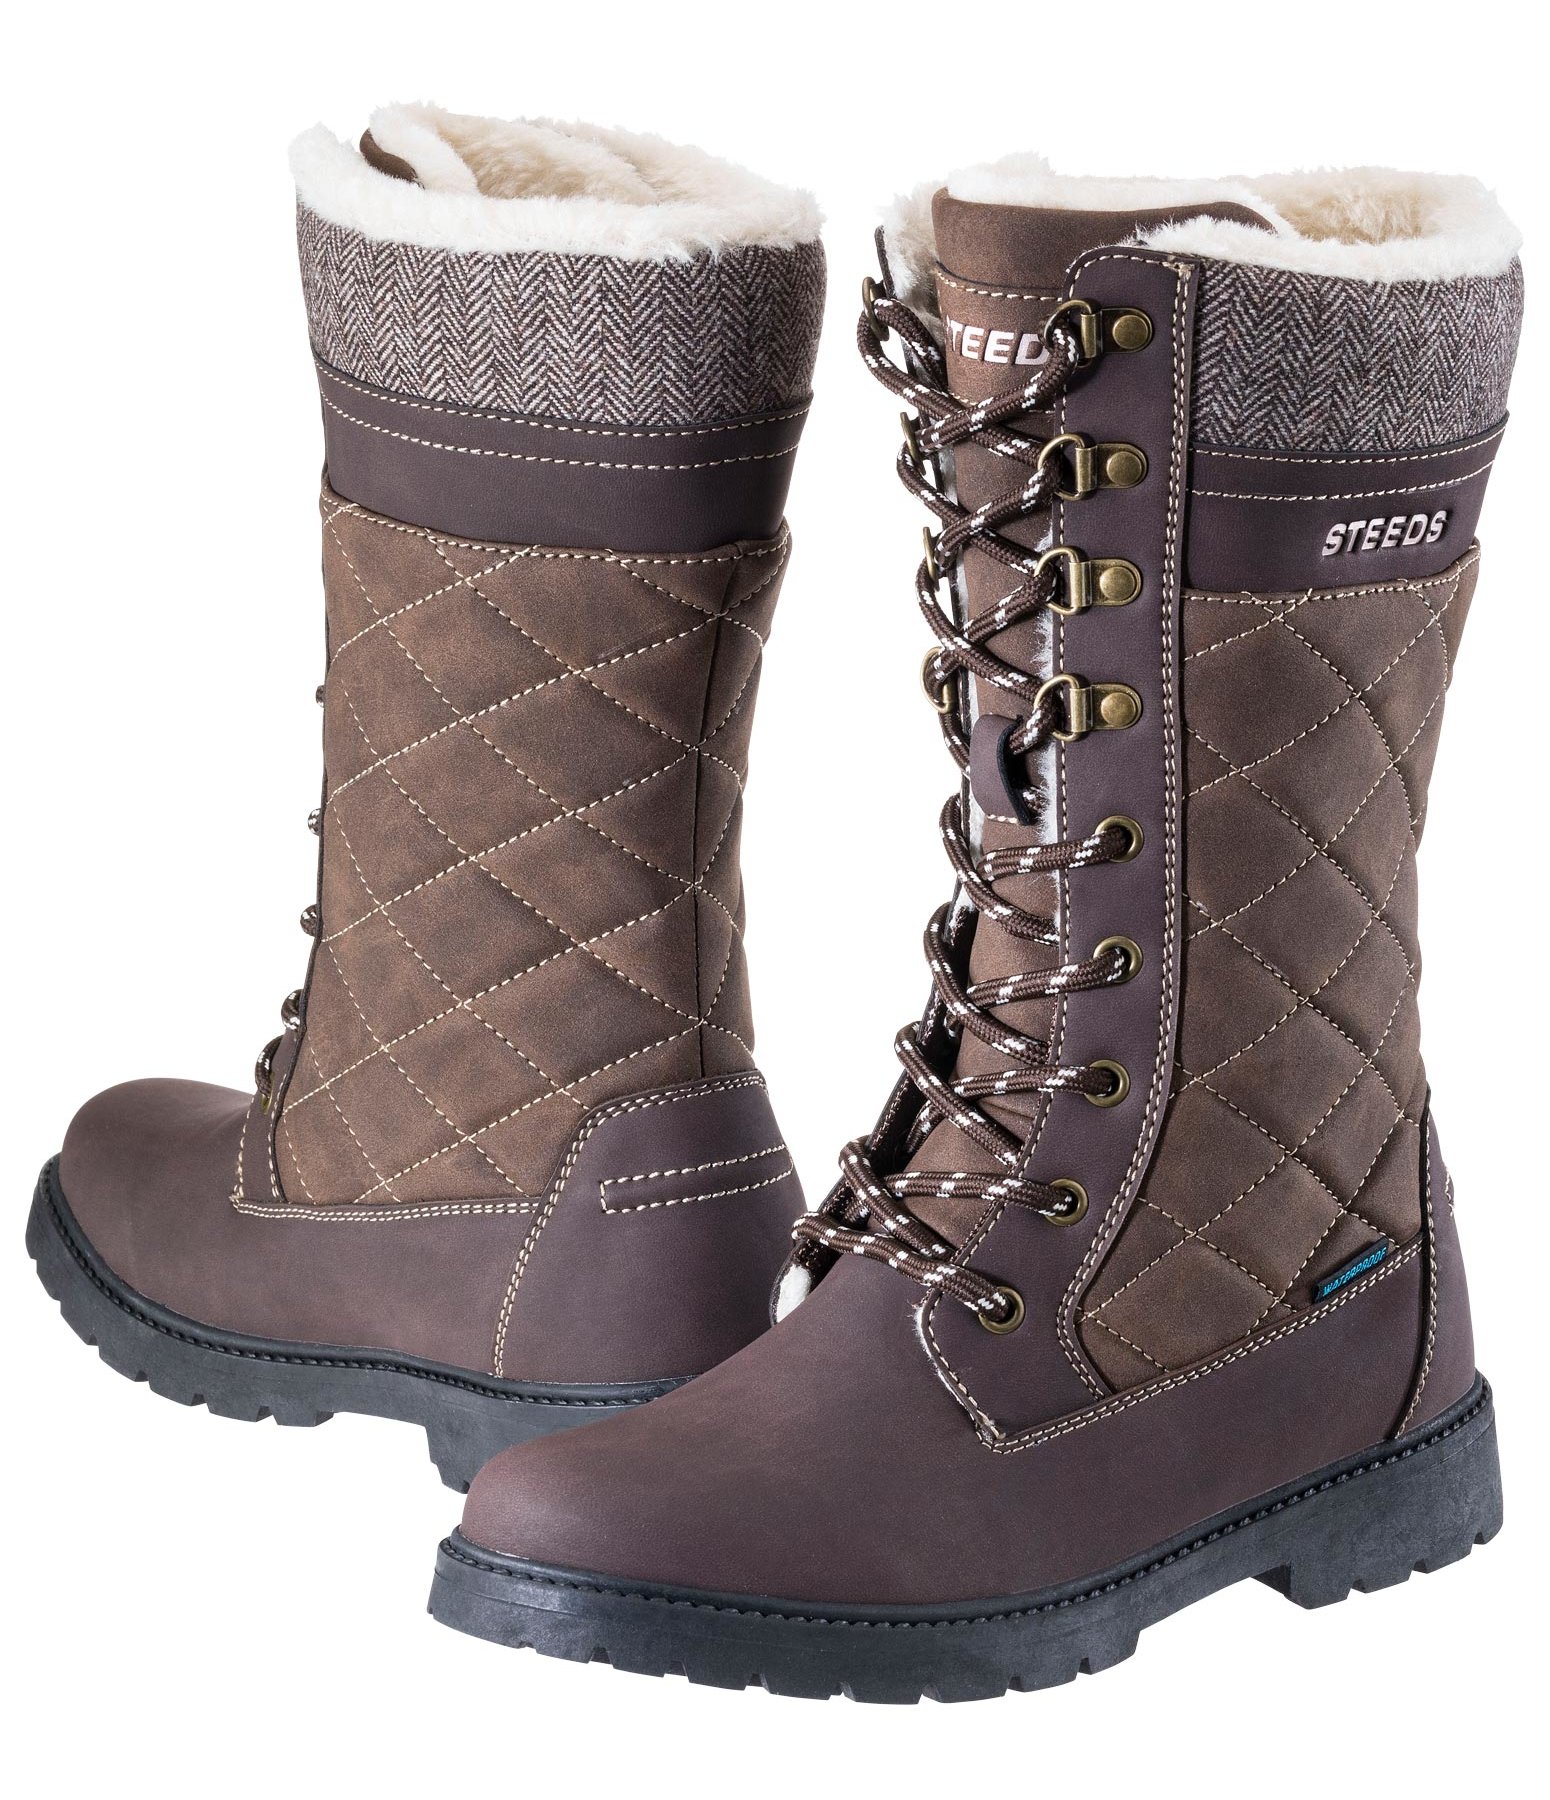 Bottes d'curie d'hiver  Tundra